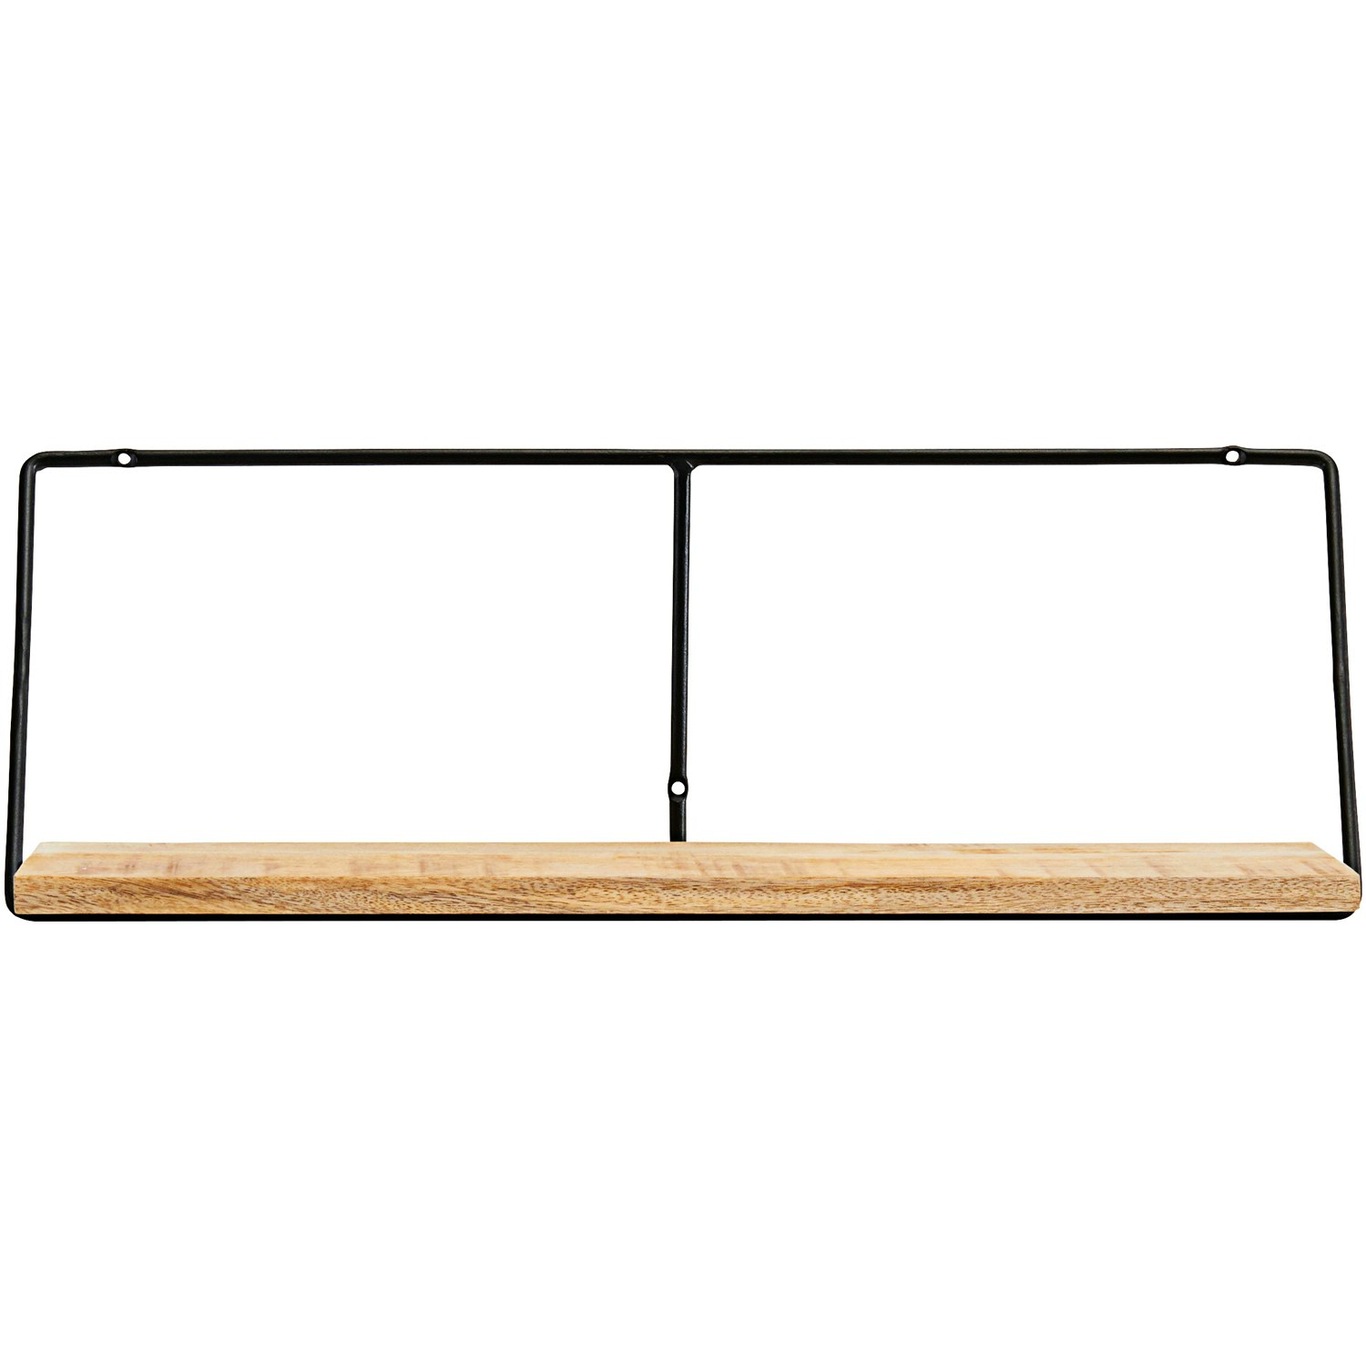 Wired Regal 70x24 cm, helles Holz